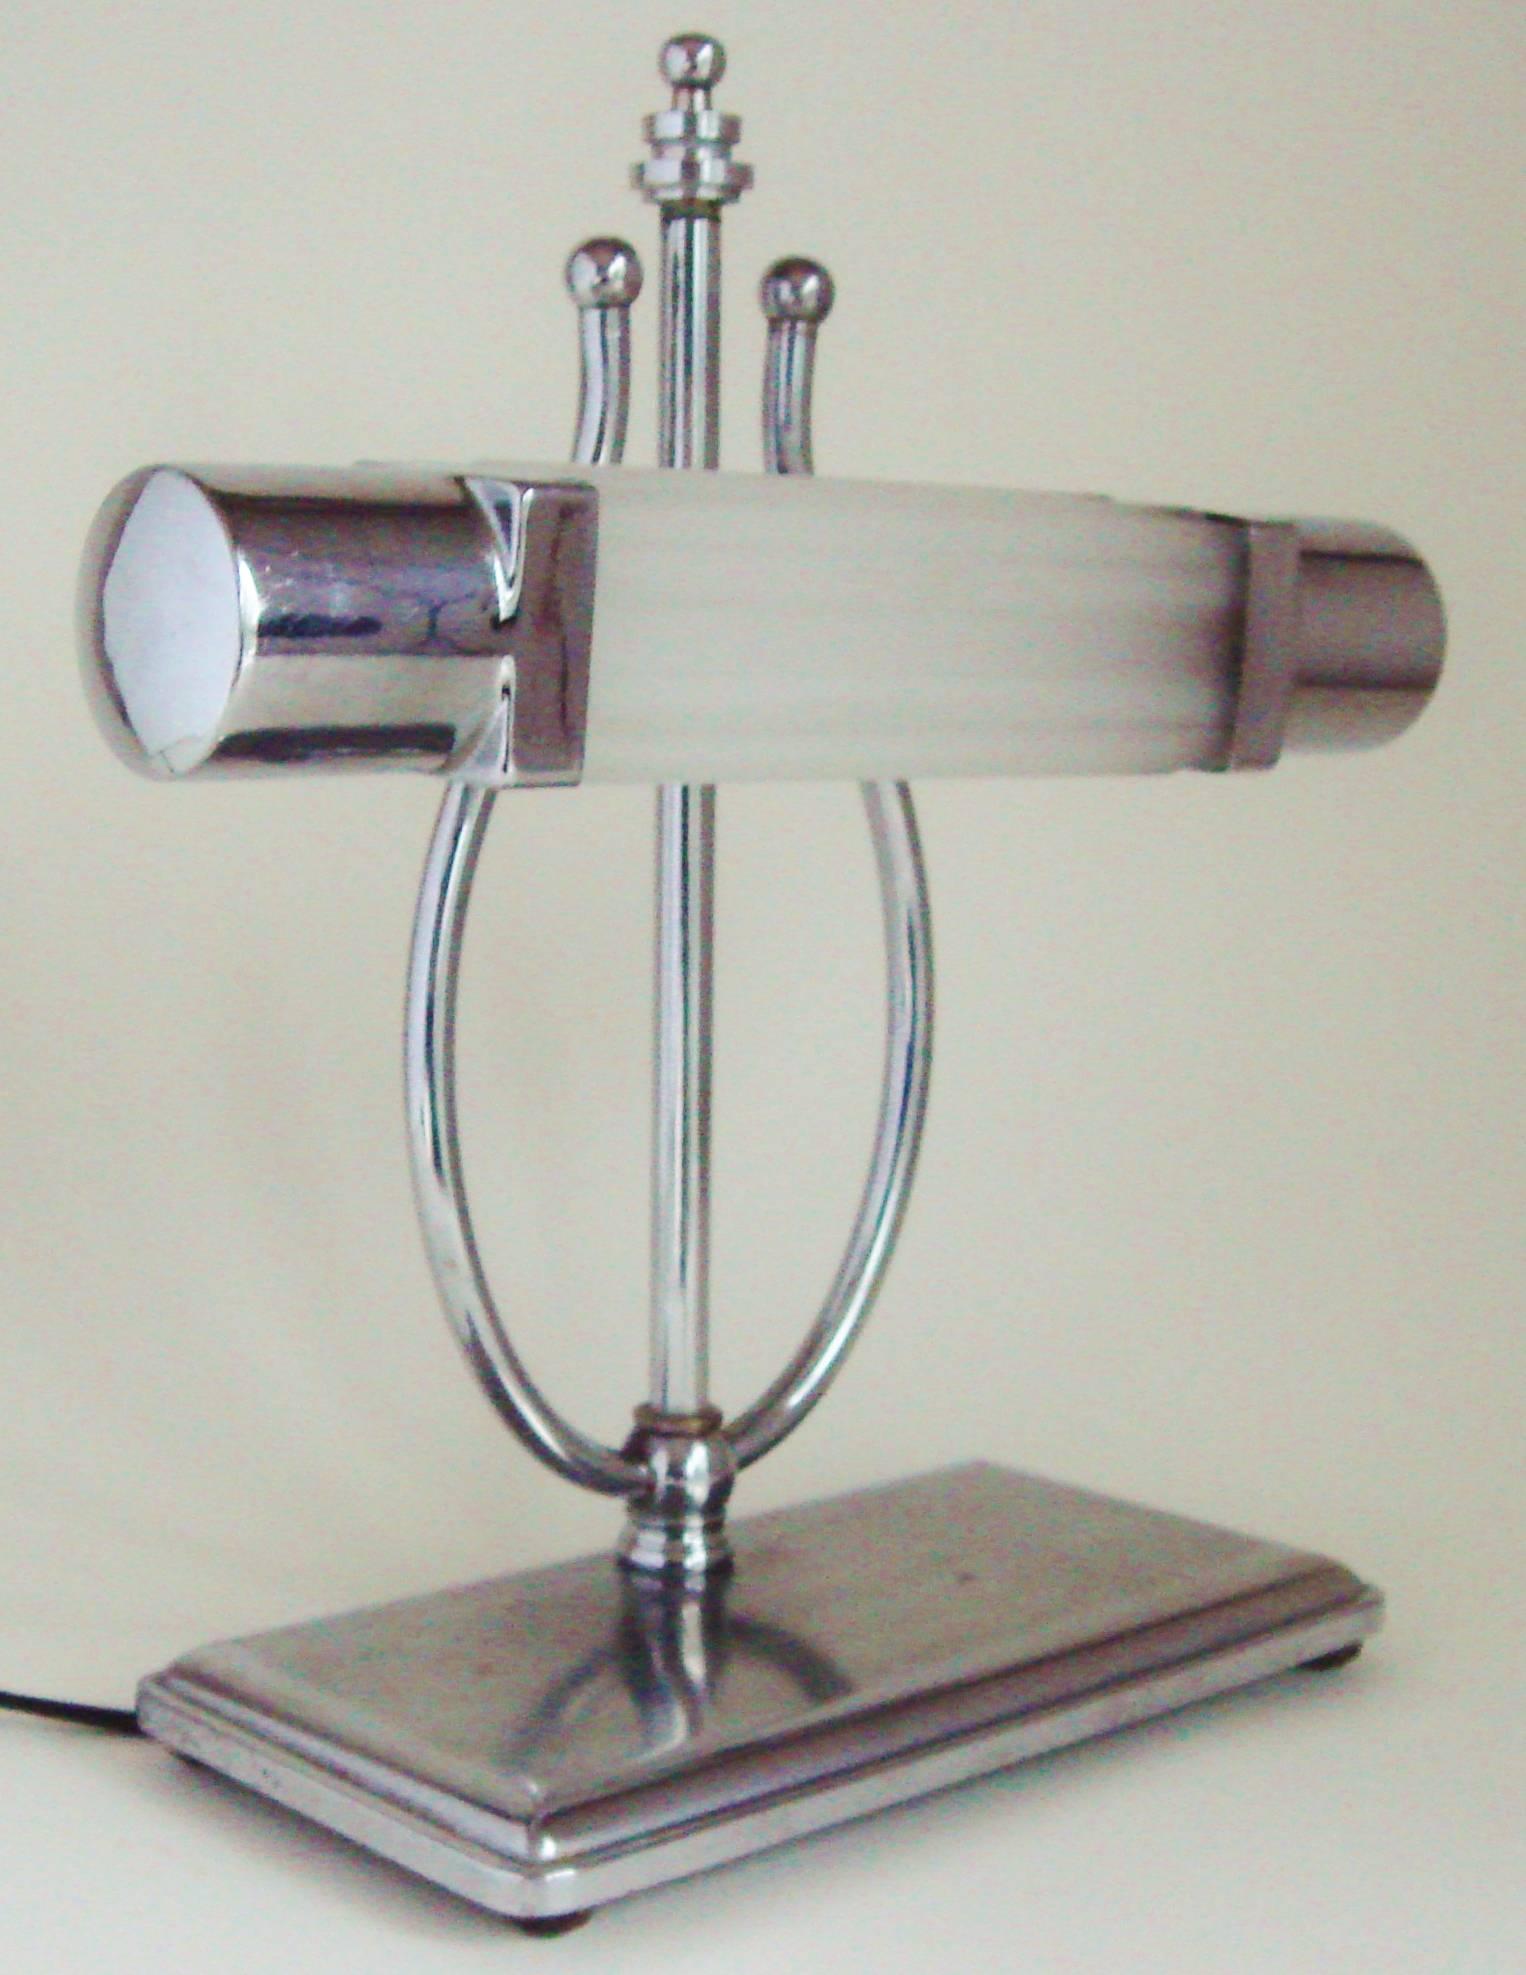 This American Art Deco piano lamp features a ribbed rectangular frosted glass shade with chrome caps at either end. This is affixed to a lyre shaped support that rises from a rectangular shaped, polished and brushed chrome base standing on four bun